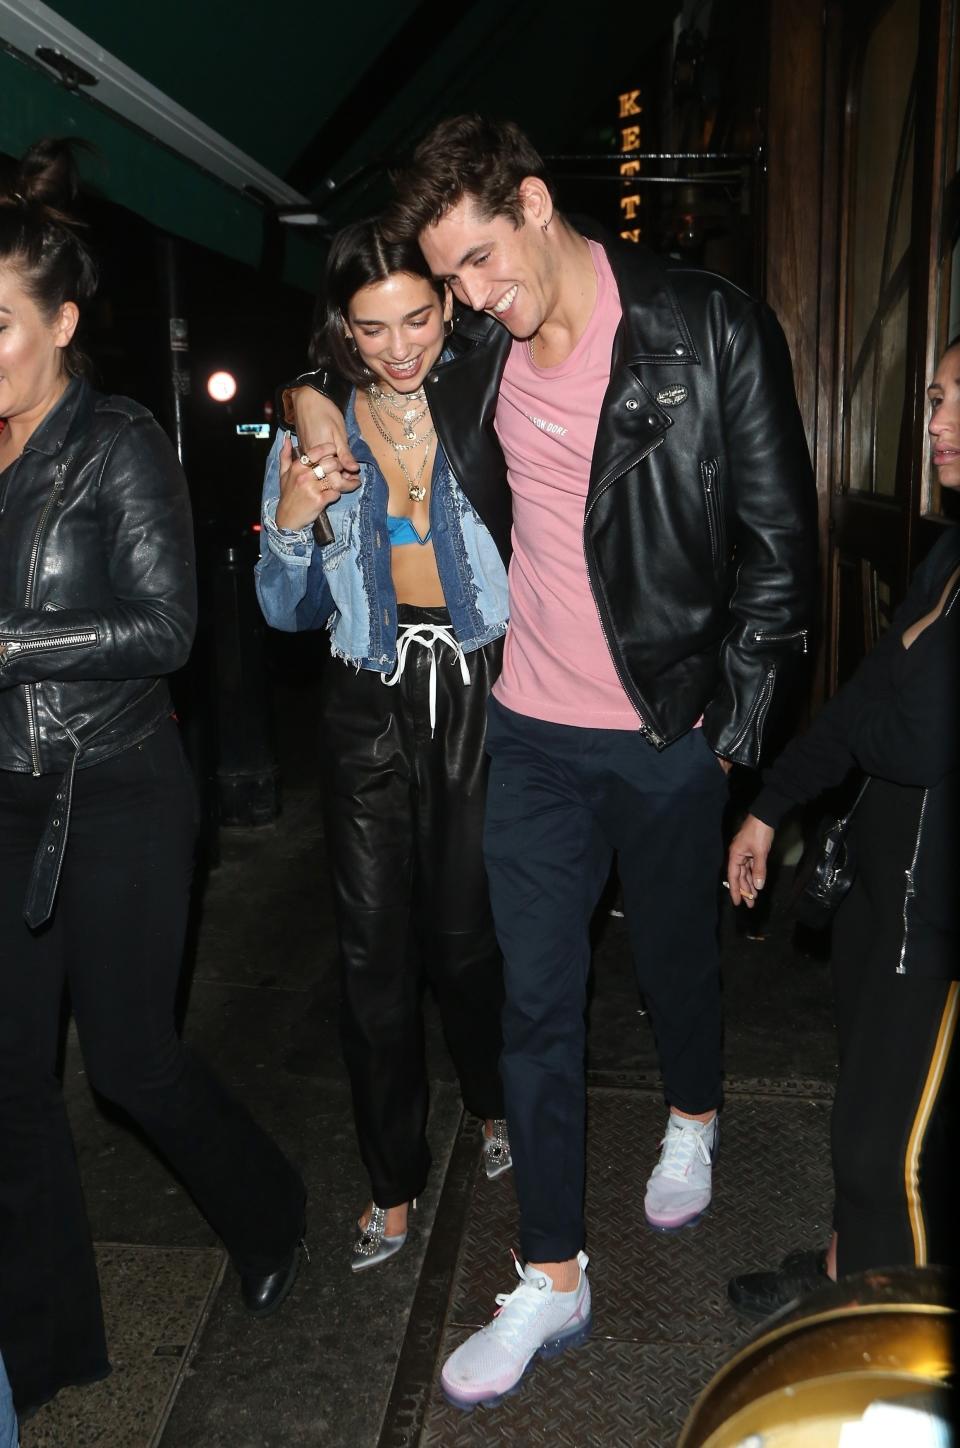 ** RIGHTS: ONLY UNITED STATES, BRAZIL, CANADA ** London, UNITED KINGDOM  - Pop star Dua Lipa shows off her curves in a tiny blue bralette as she cuddles up to her model beau Isaac Carew as they walk through SoHo, London. Dua was seen walking from SoHo House to The Box nightclub for a night of partying with her man.Pictured: Dua Lipa, Isaac CarewBACKGRID USA 30 MAY 2018 USA: +1 310 798 9111 / usasales@backgrid.comUK: +44 208 344 2007 / uksales@backgrid.comUK Clients - Pictures Containing ChildrenPlease Pixelate Face Prior To Publication